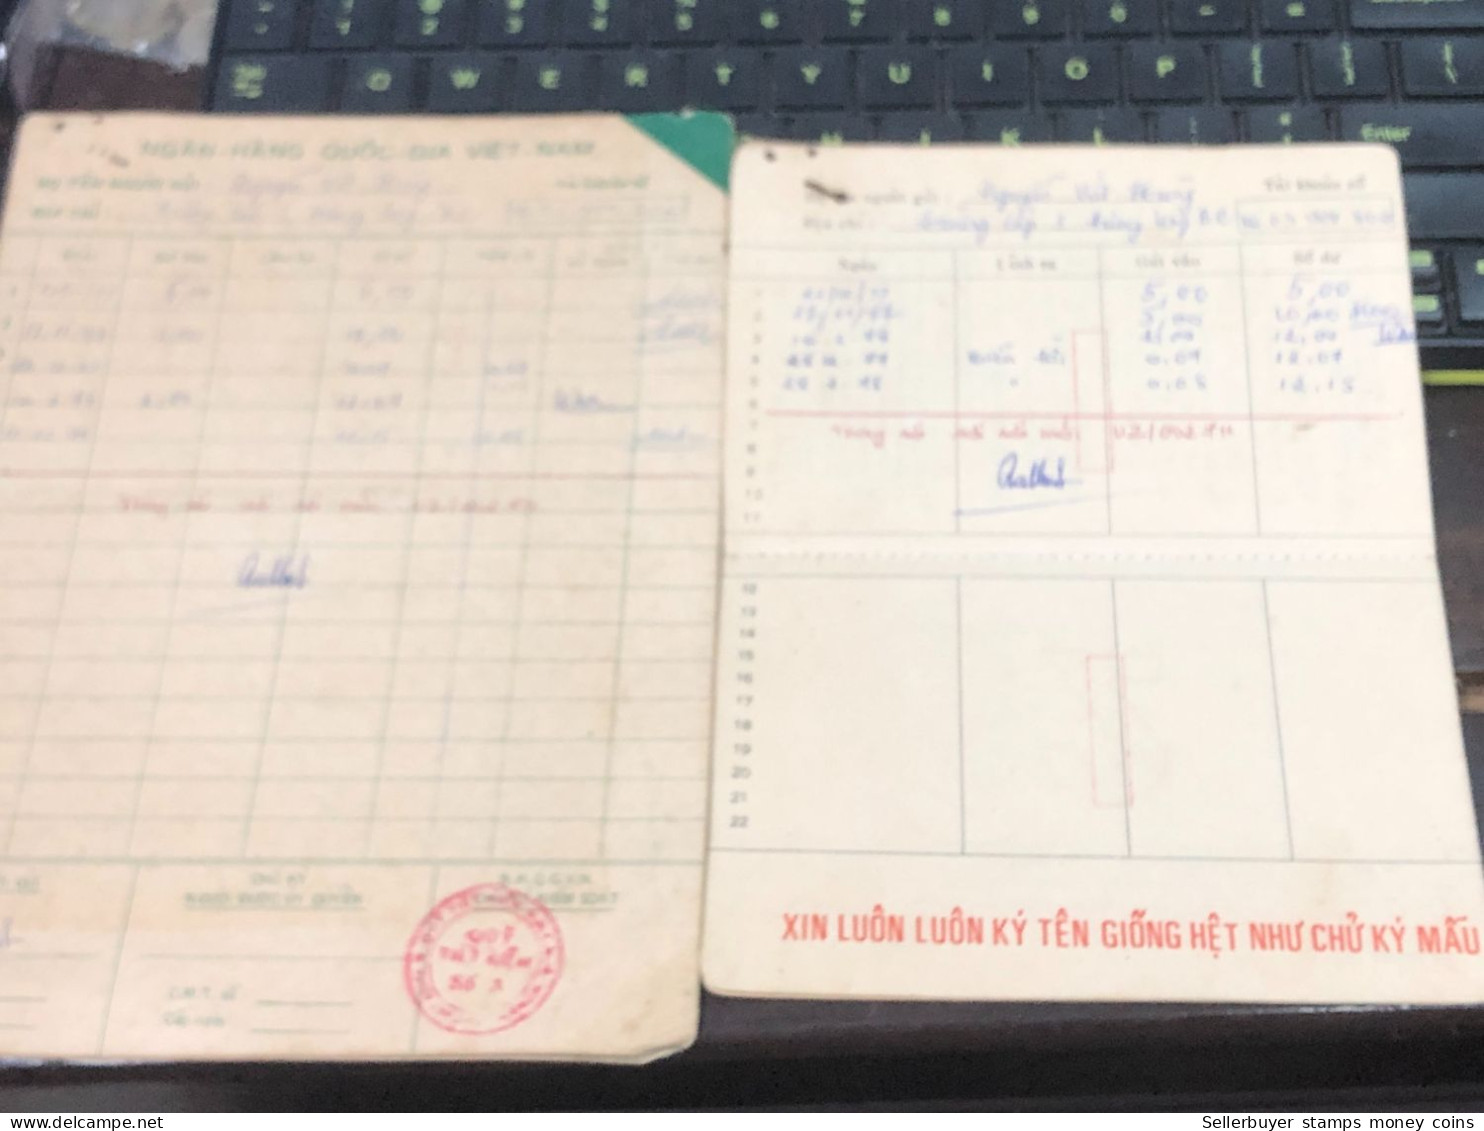 NAM VIET NAM STATE BANK SAVINGS BOOK PREVIOUS -1 976-PCS 1 BOOK OLD - Cheques En Traveller's Cheques